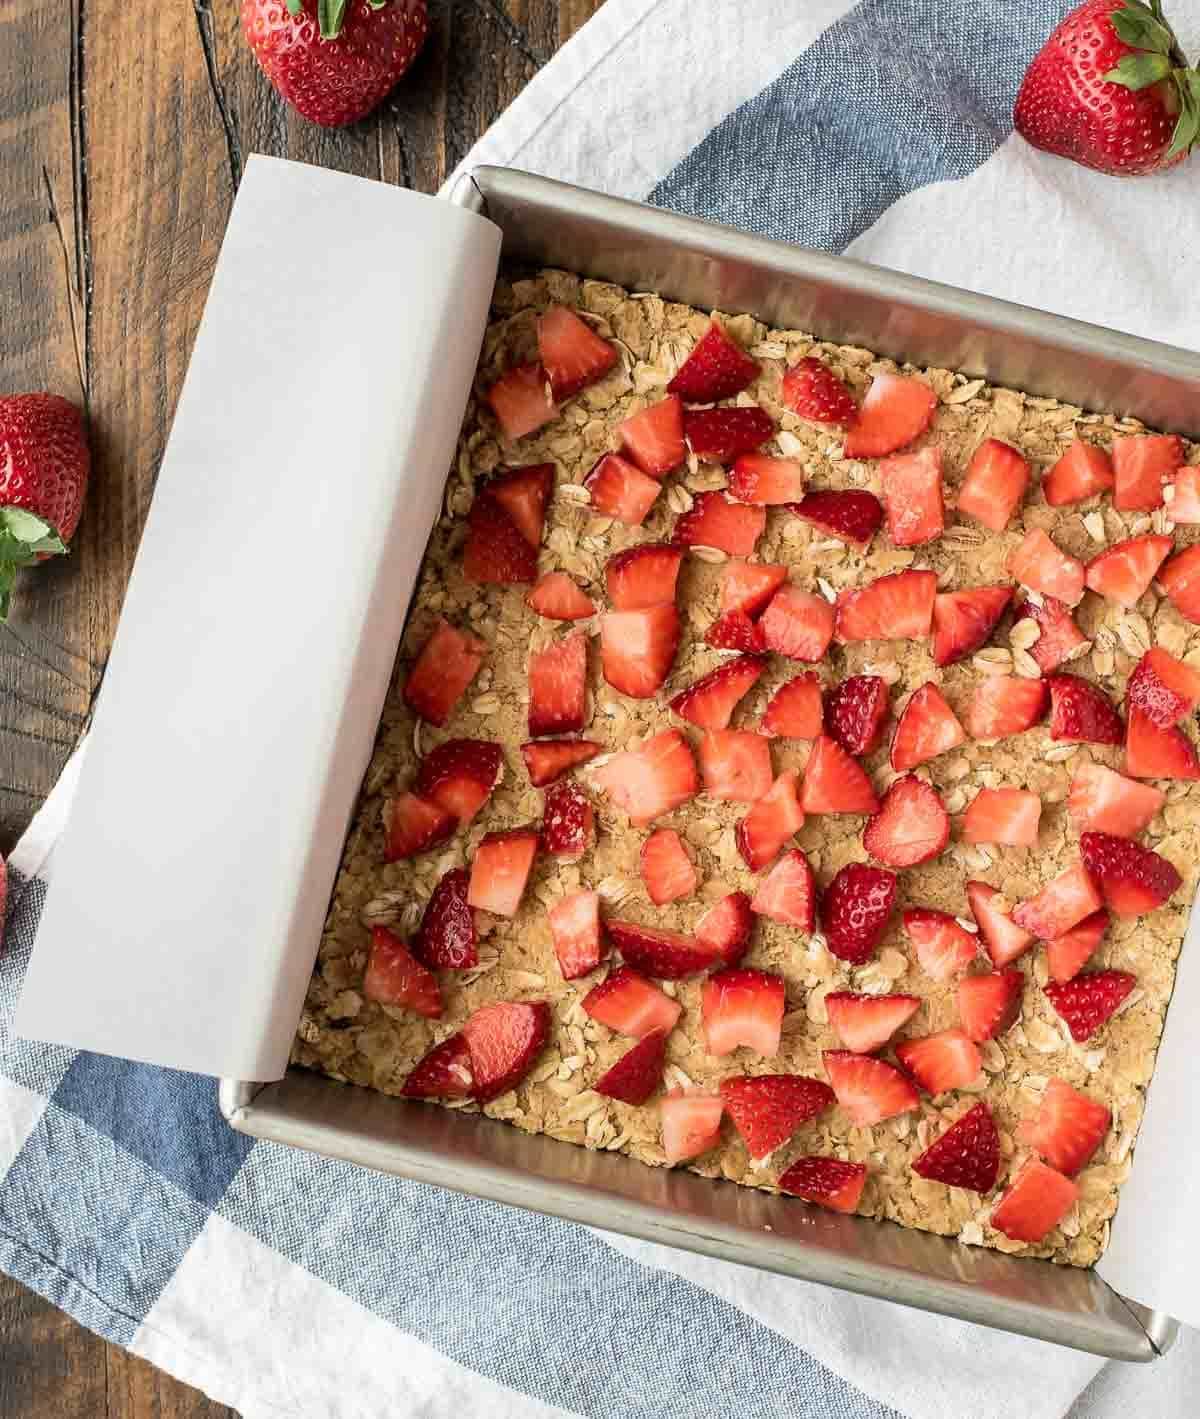 These Fresh Strawberry Oatmeal Bars couldn’t be easier or more delicious! With a buttery crumb topping, sweet strawberry filling, and warm vanilla glaze, they are perfect for a snack or potluck. @wellplated